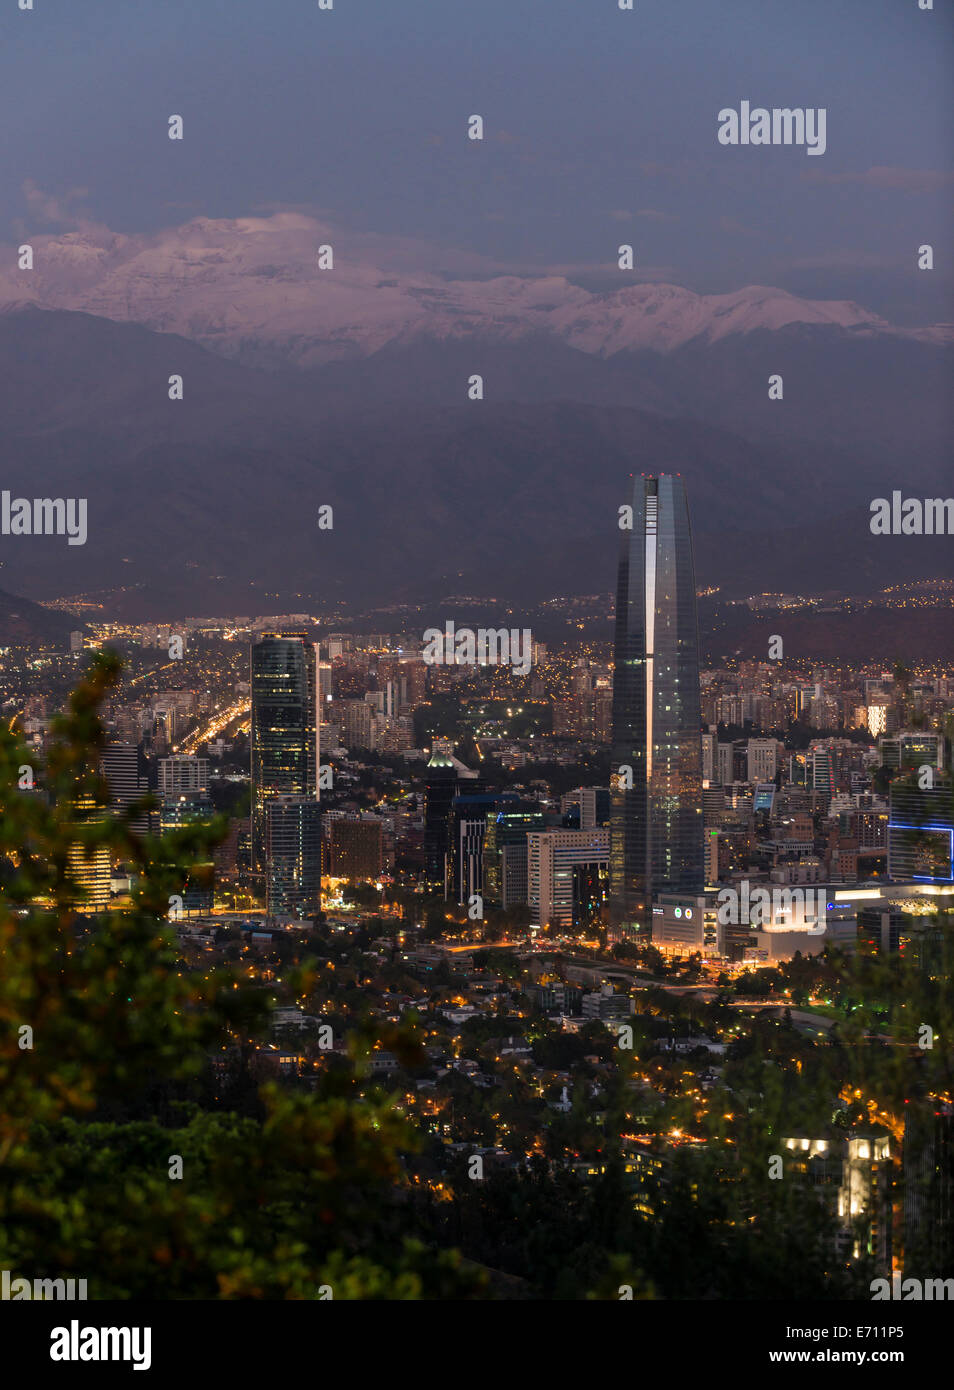 Providencia buildings and Gran Torre Santiago tower from Cerro San Cristobal hill at dusk, Santiago, Chile Stock Photo